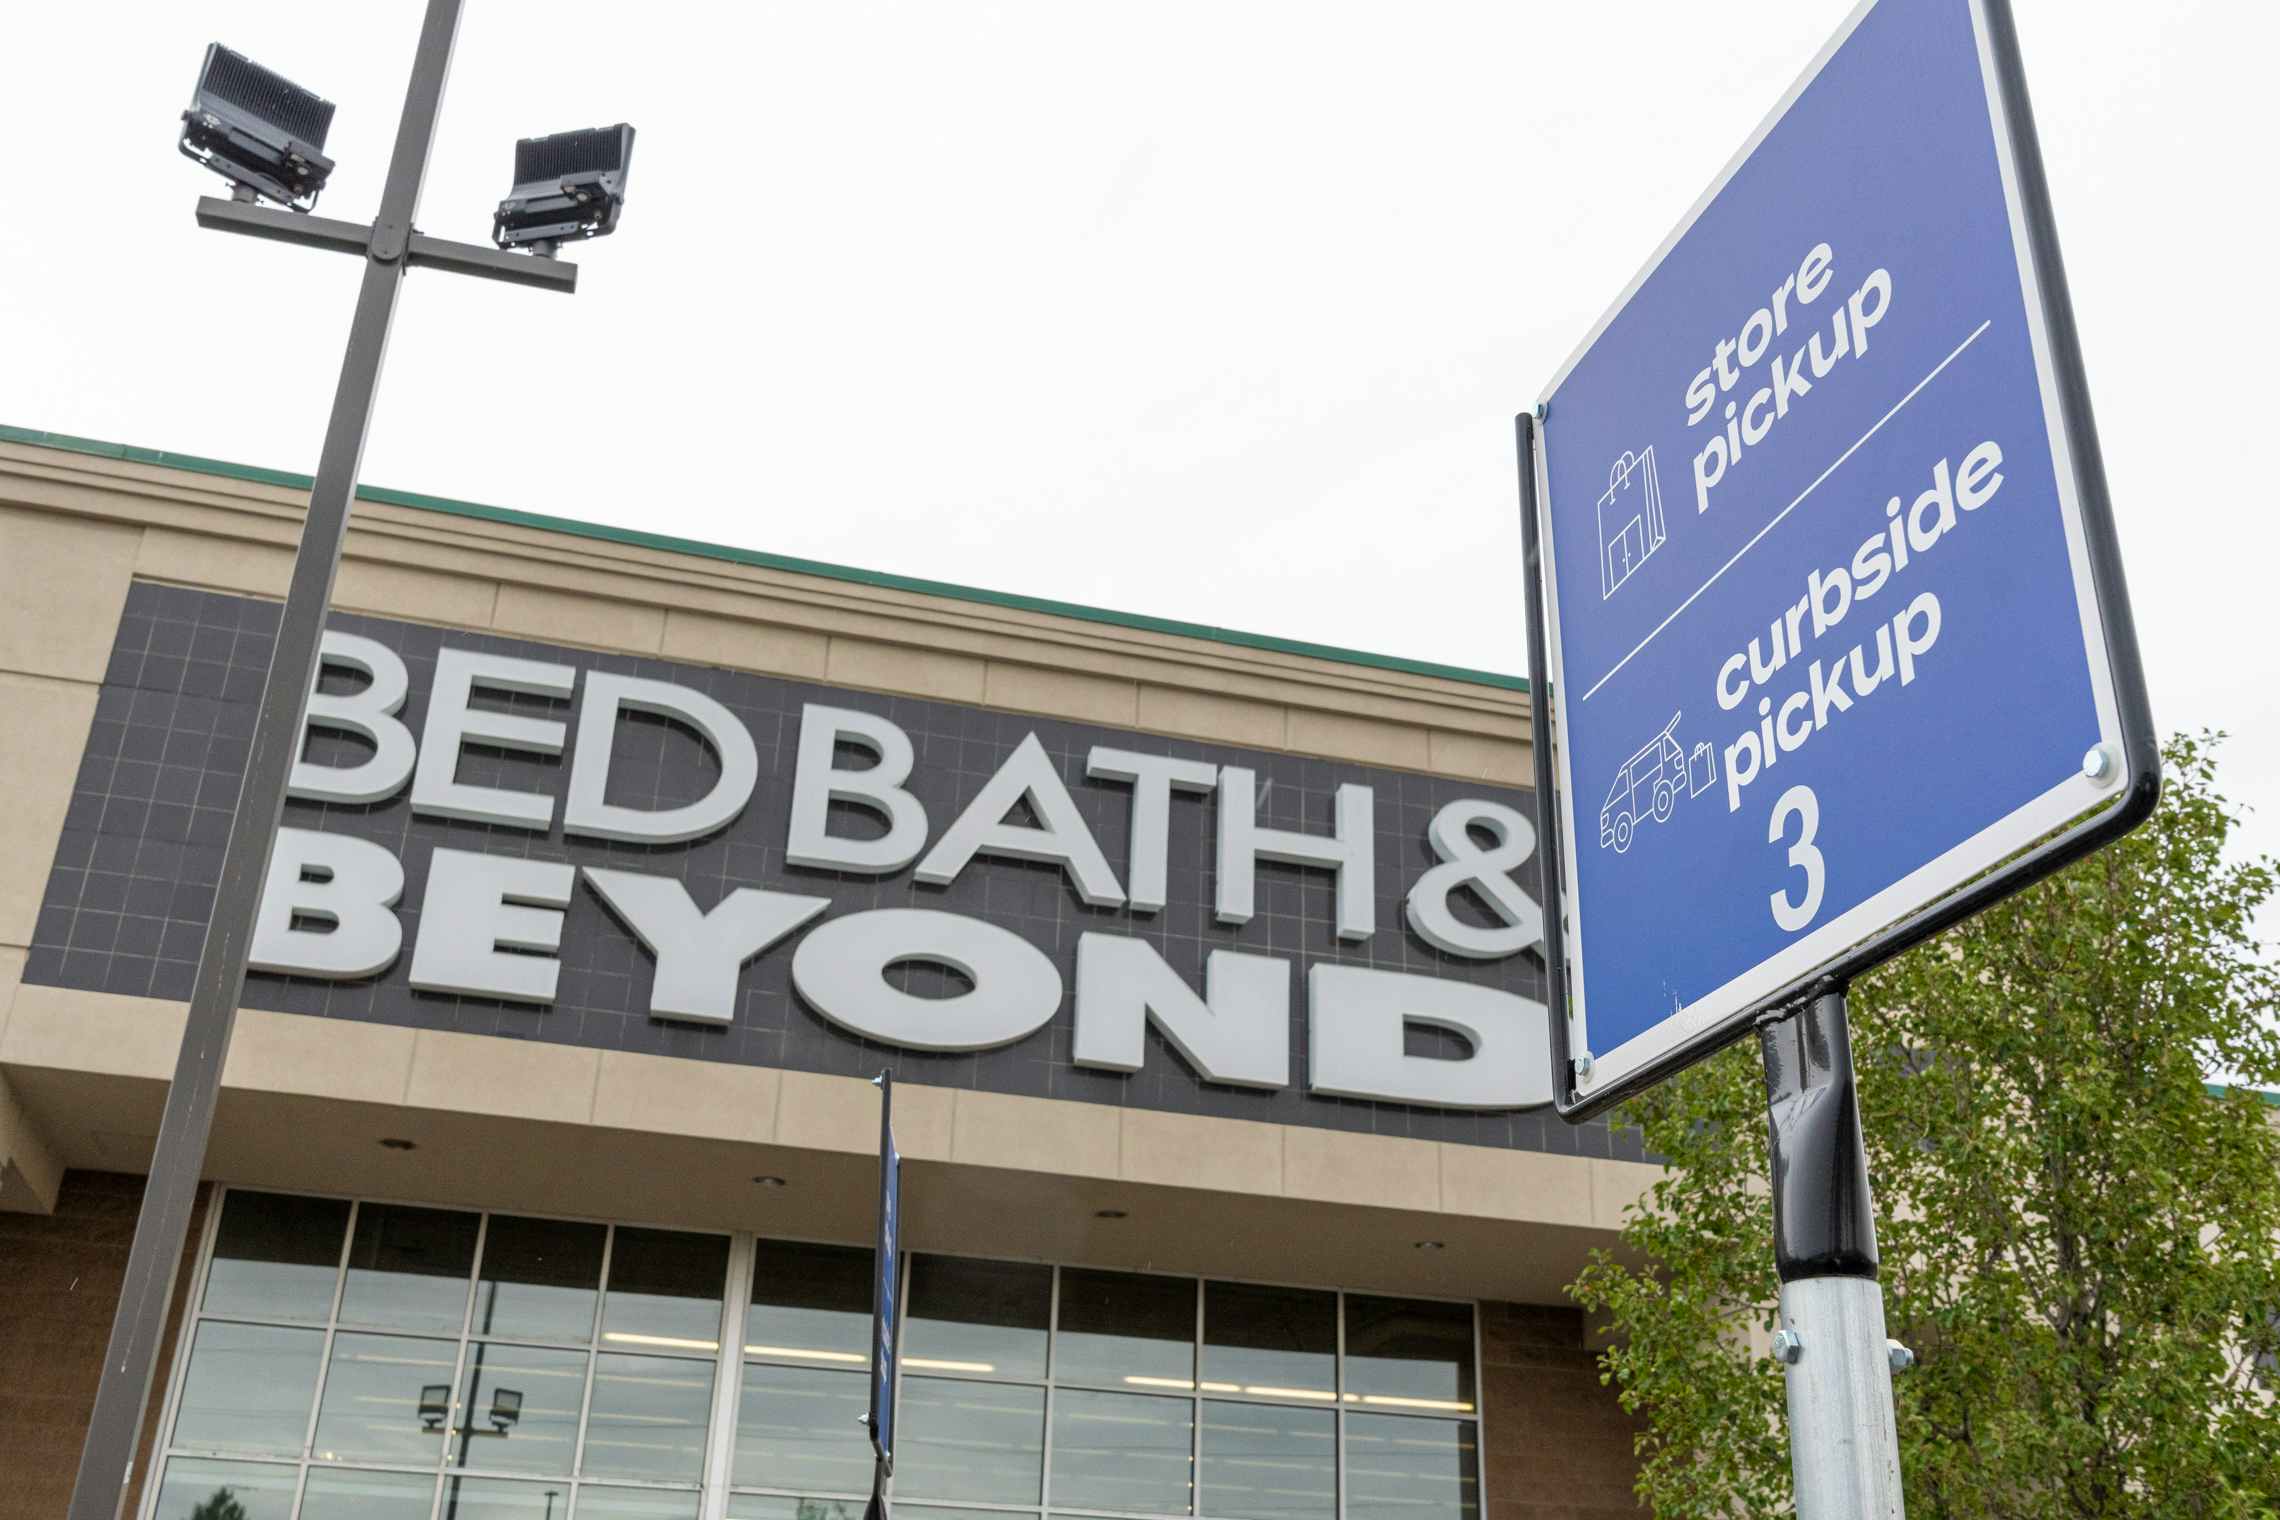 Bed Bath & Beyond store front with Curbside pickup sign.